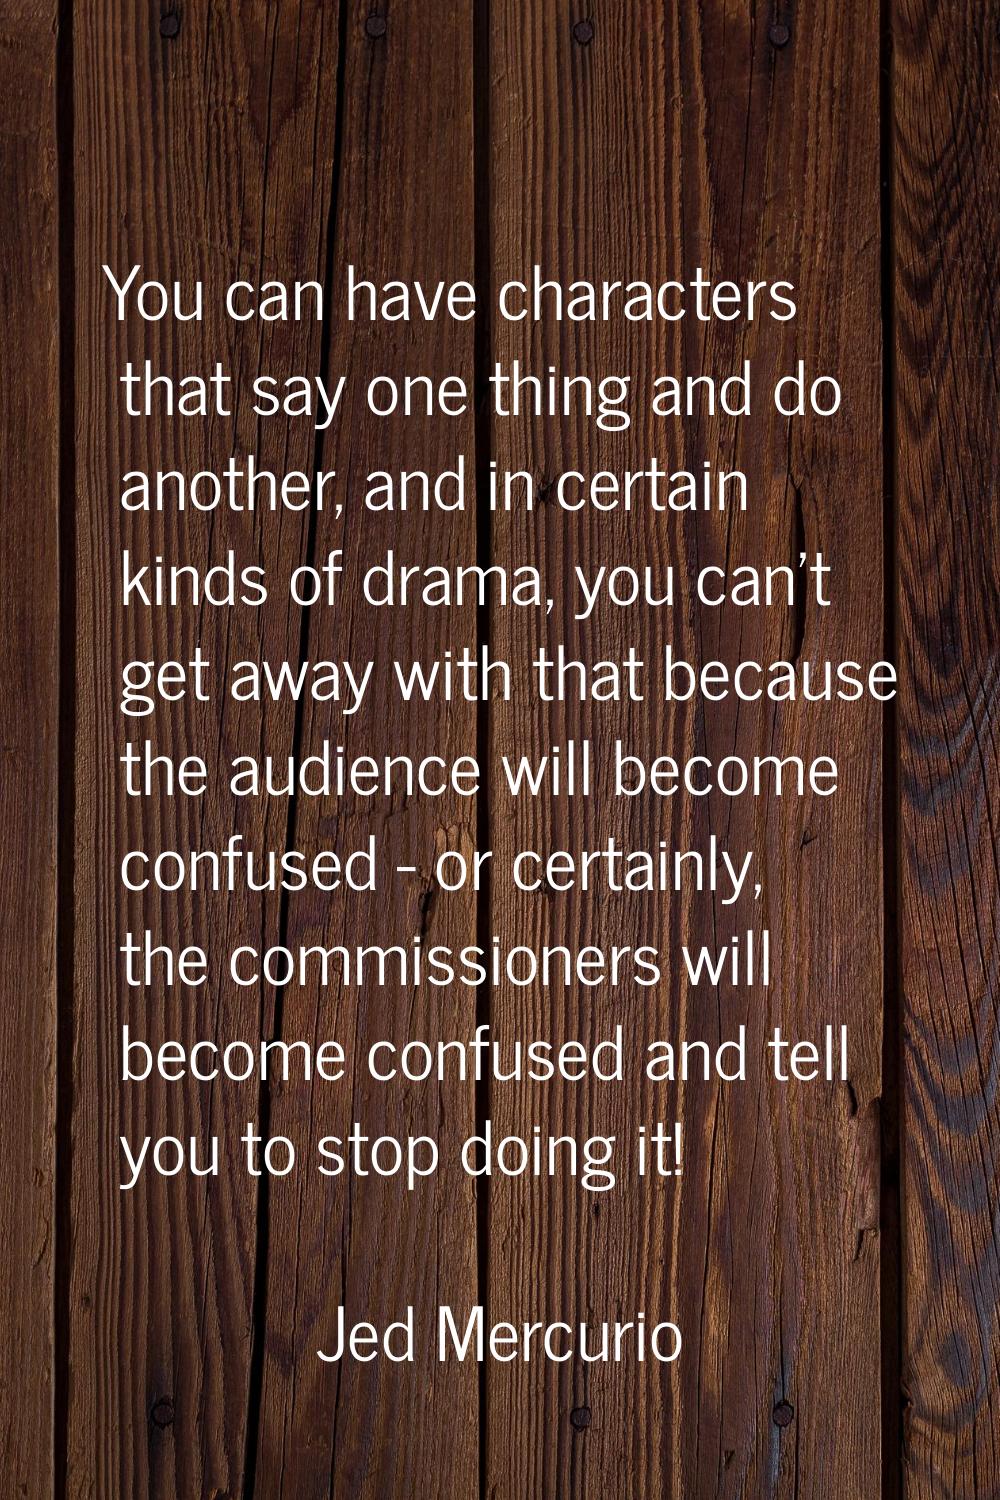 You can have characters that say one thing and do another, and in certain kinds of drama, you can't